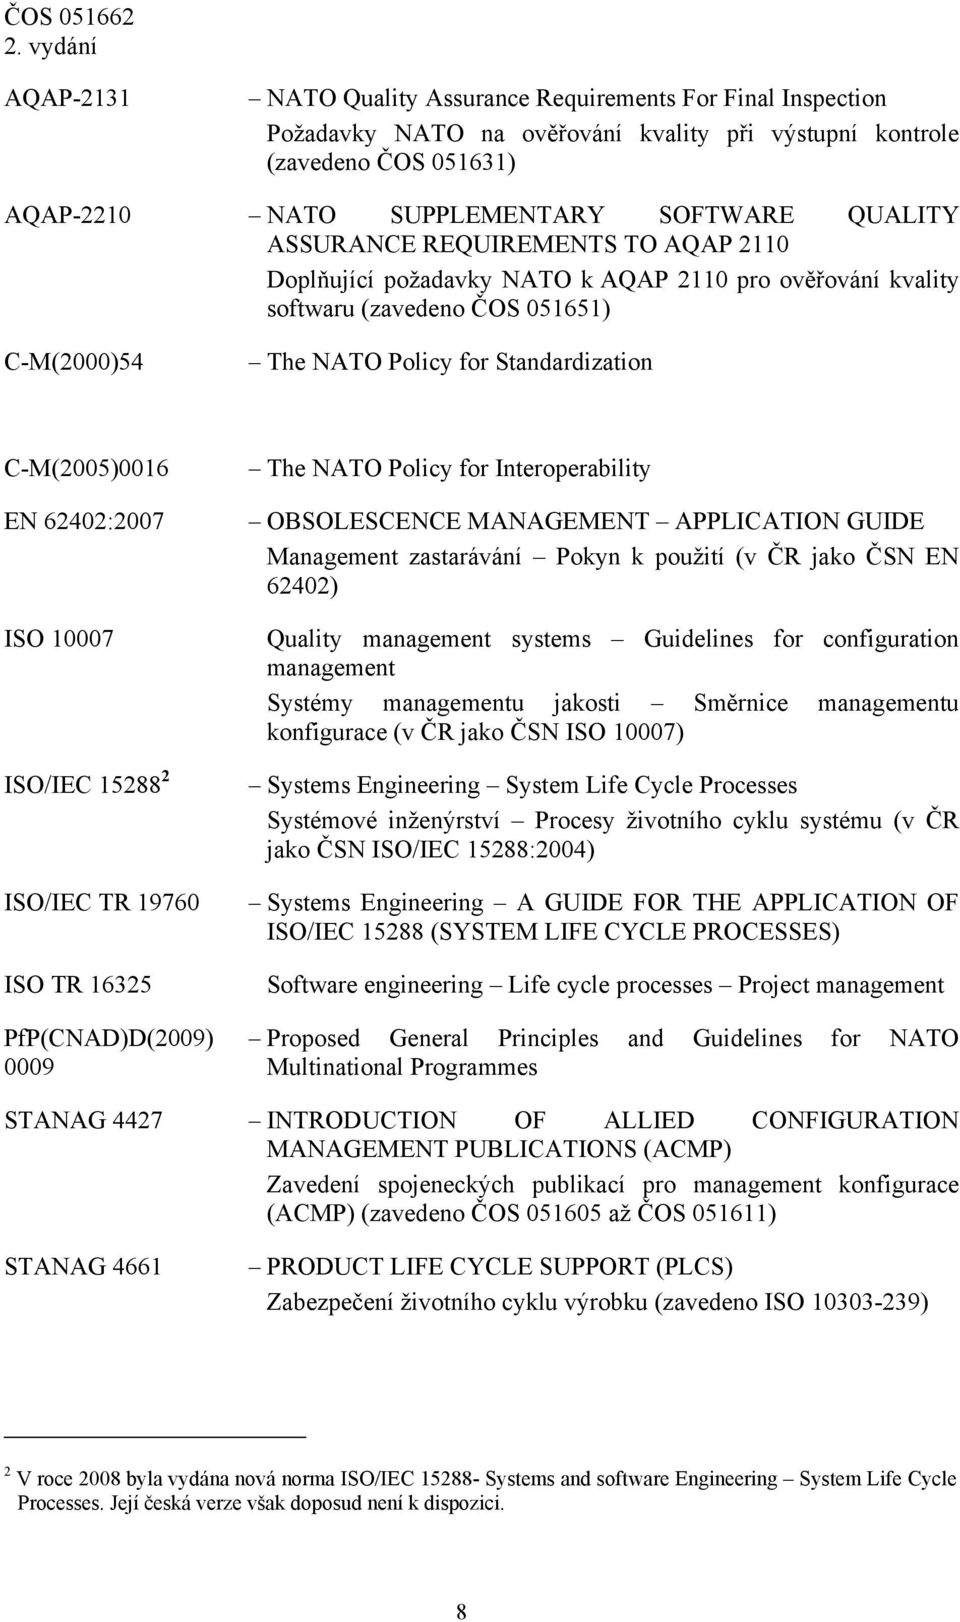 62402:2007 ISO 10007 ISO/IEC 15288 2 ISO/IEC TR 19760 ISO TR 16325 PfP(CNAD)D(2009) 0009 The NATO Policy for Interoperability OBSOLESCENCE MANAGEMENT APPLICATION GUIDE Management zastarávání Pokyn k